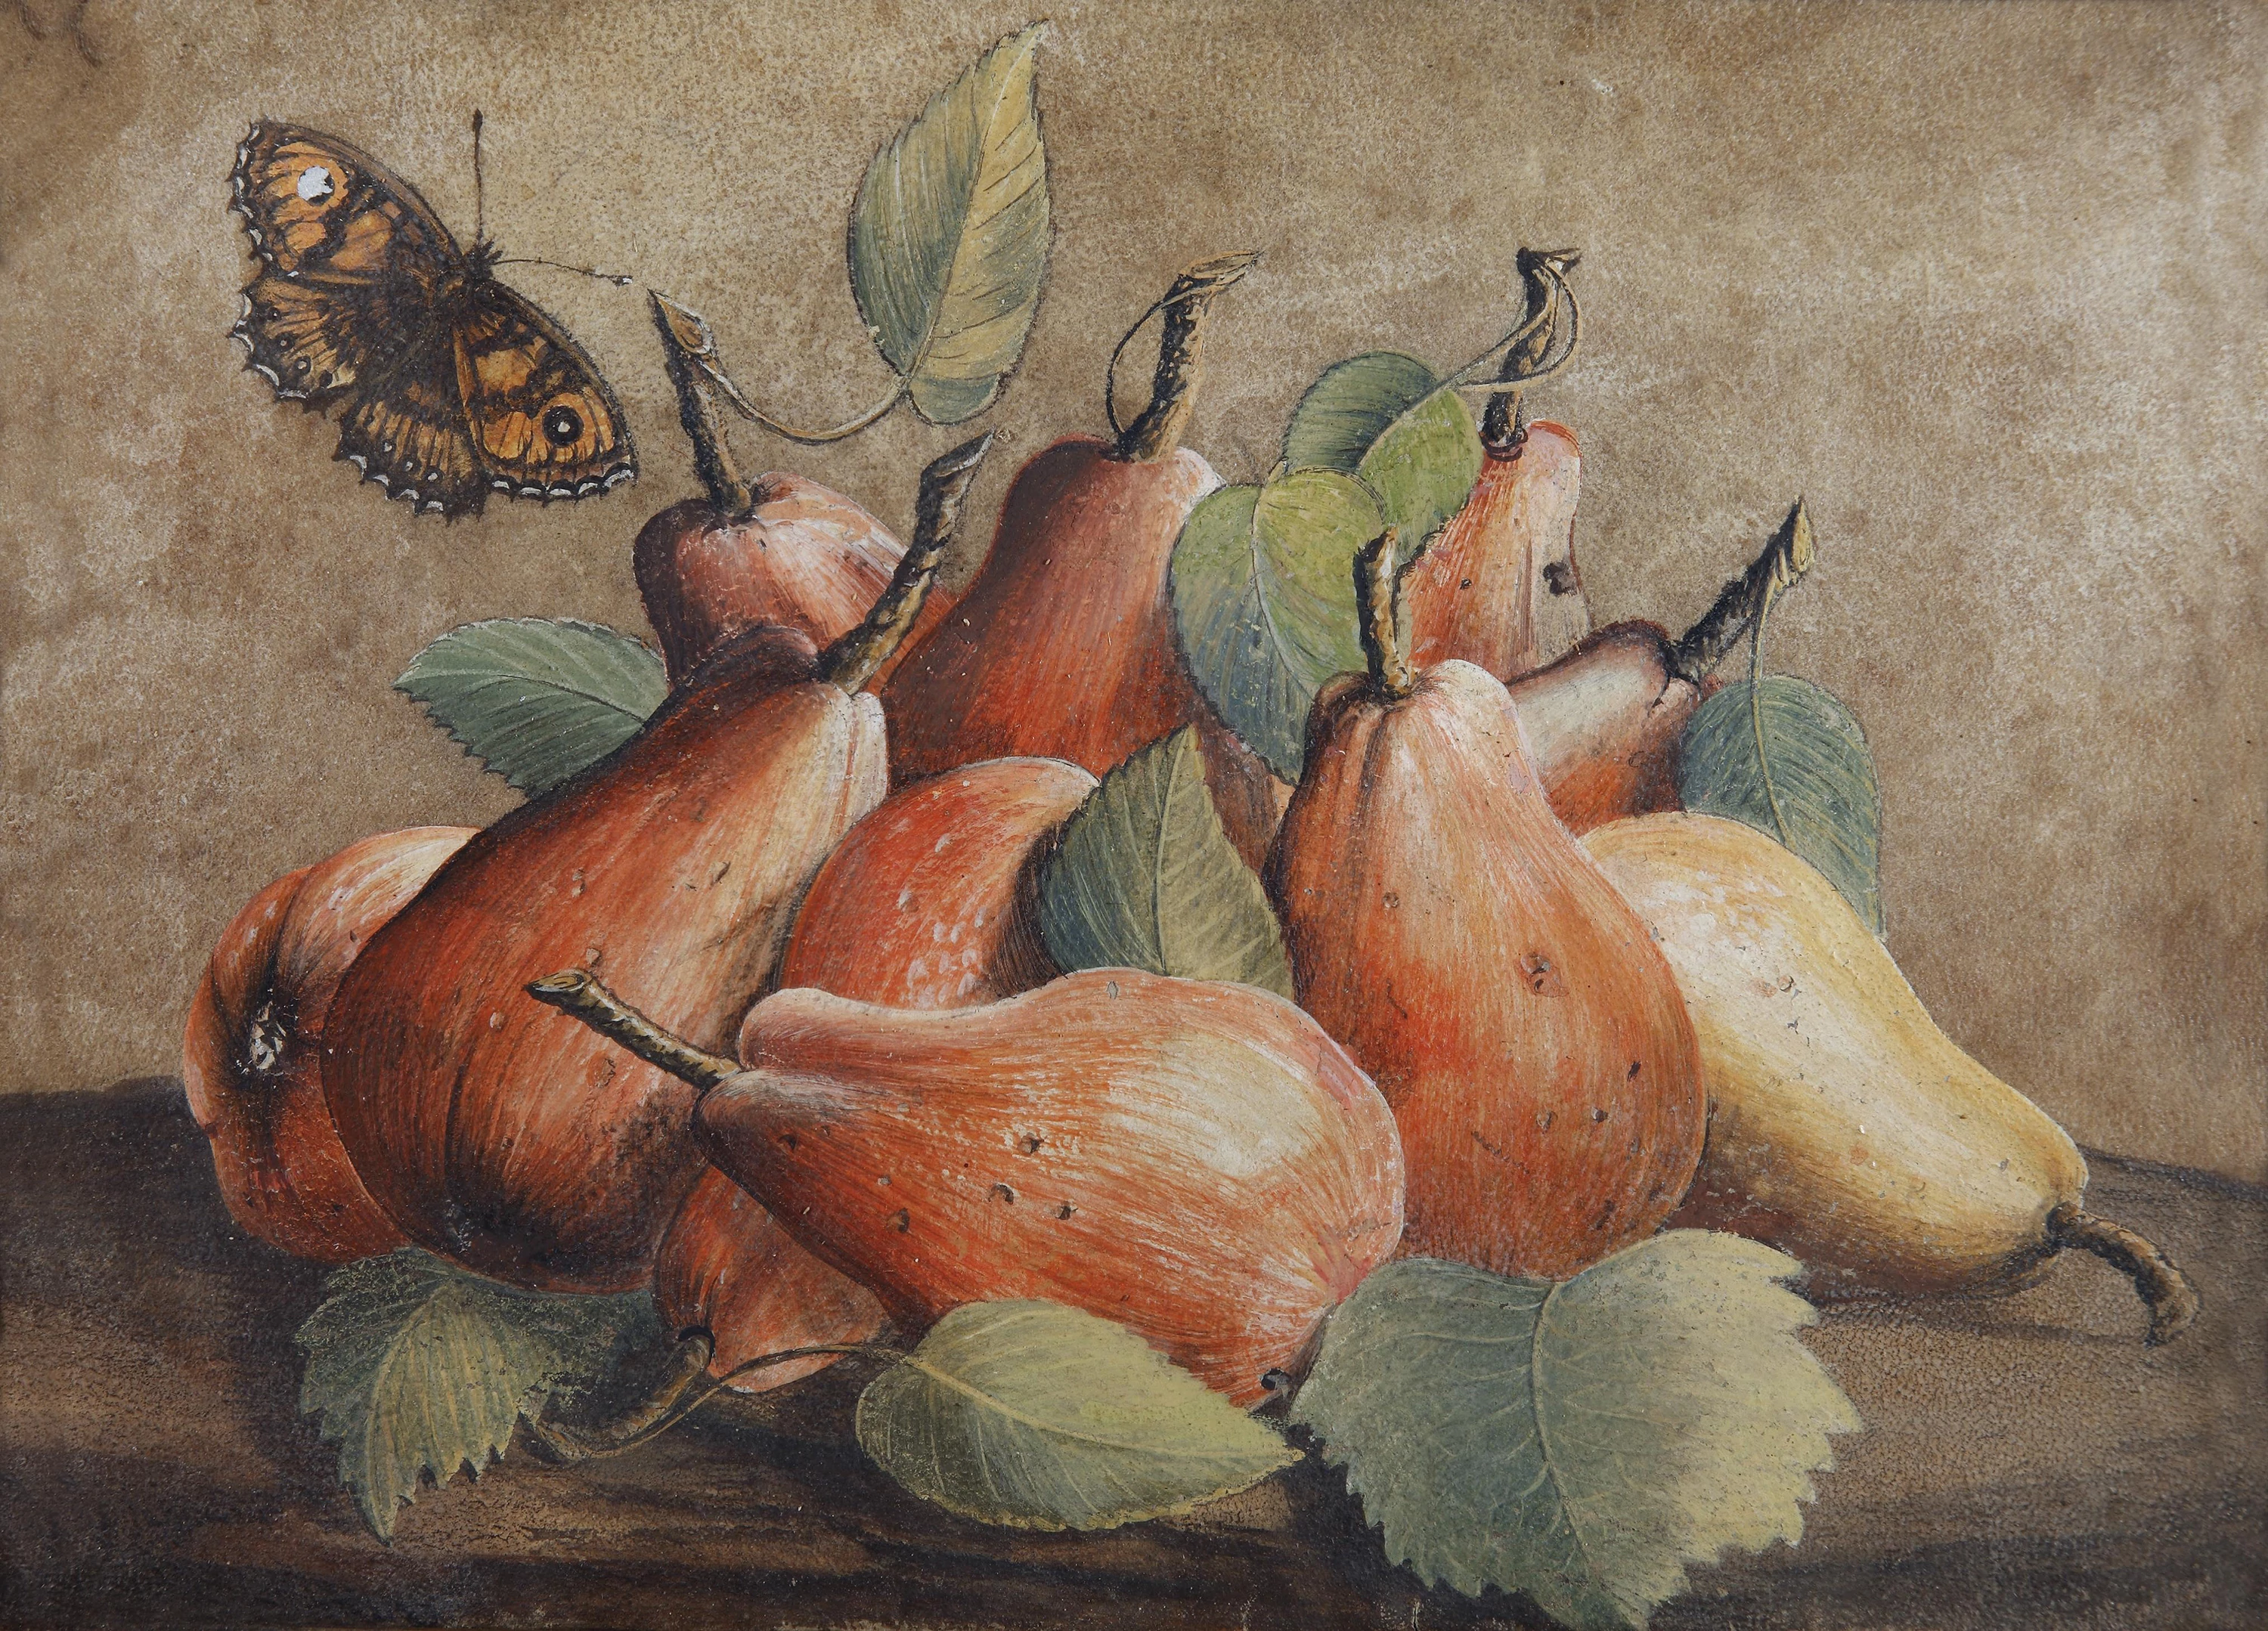 Still Life with Pears and a Butterfly, Giovanna Garzoni